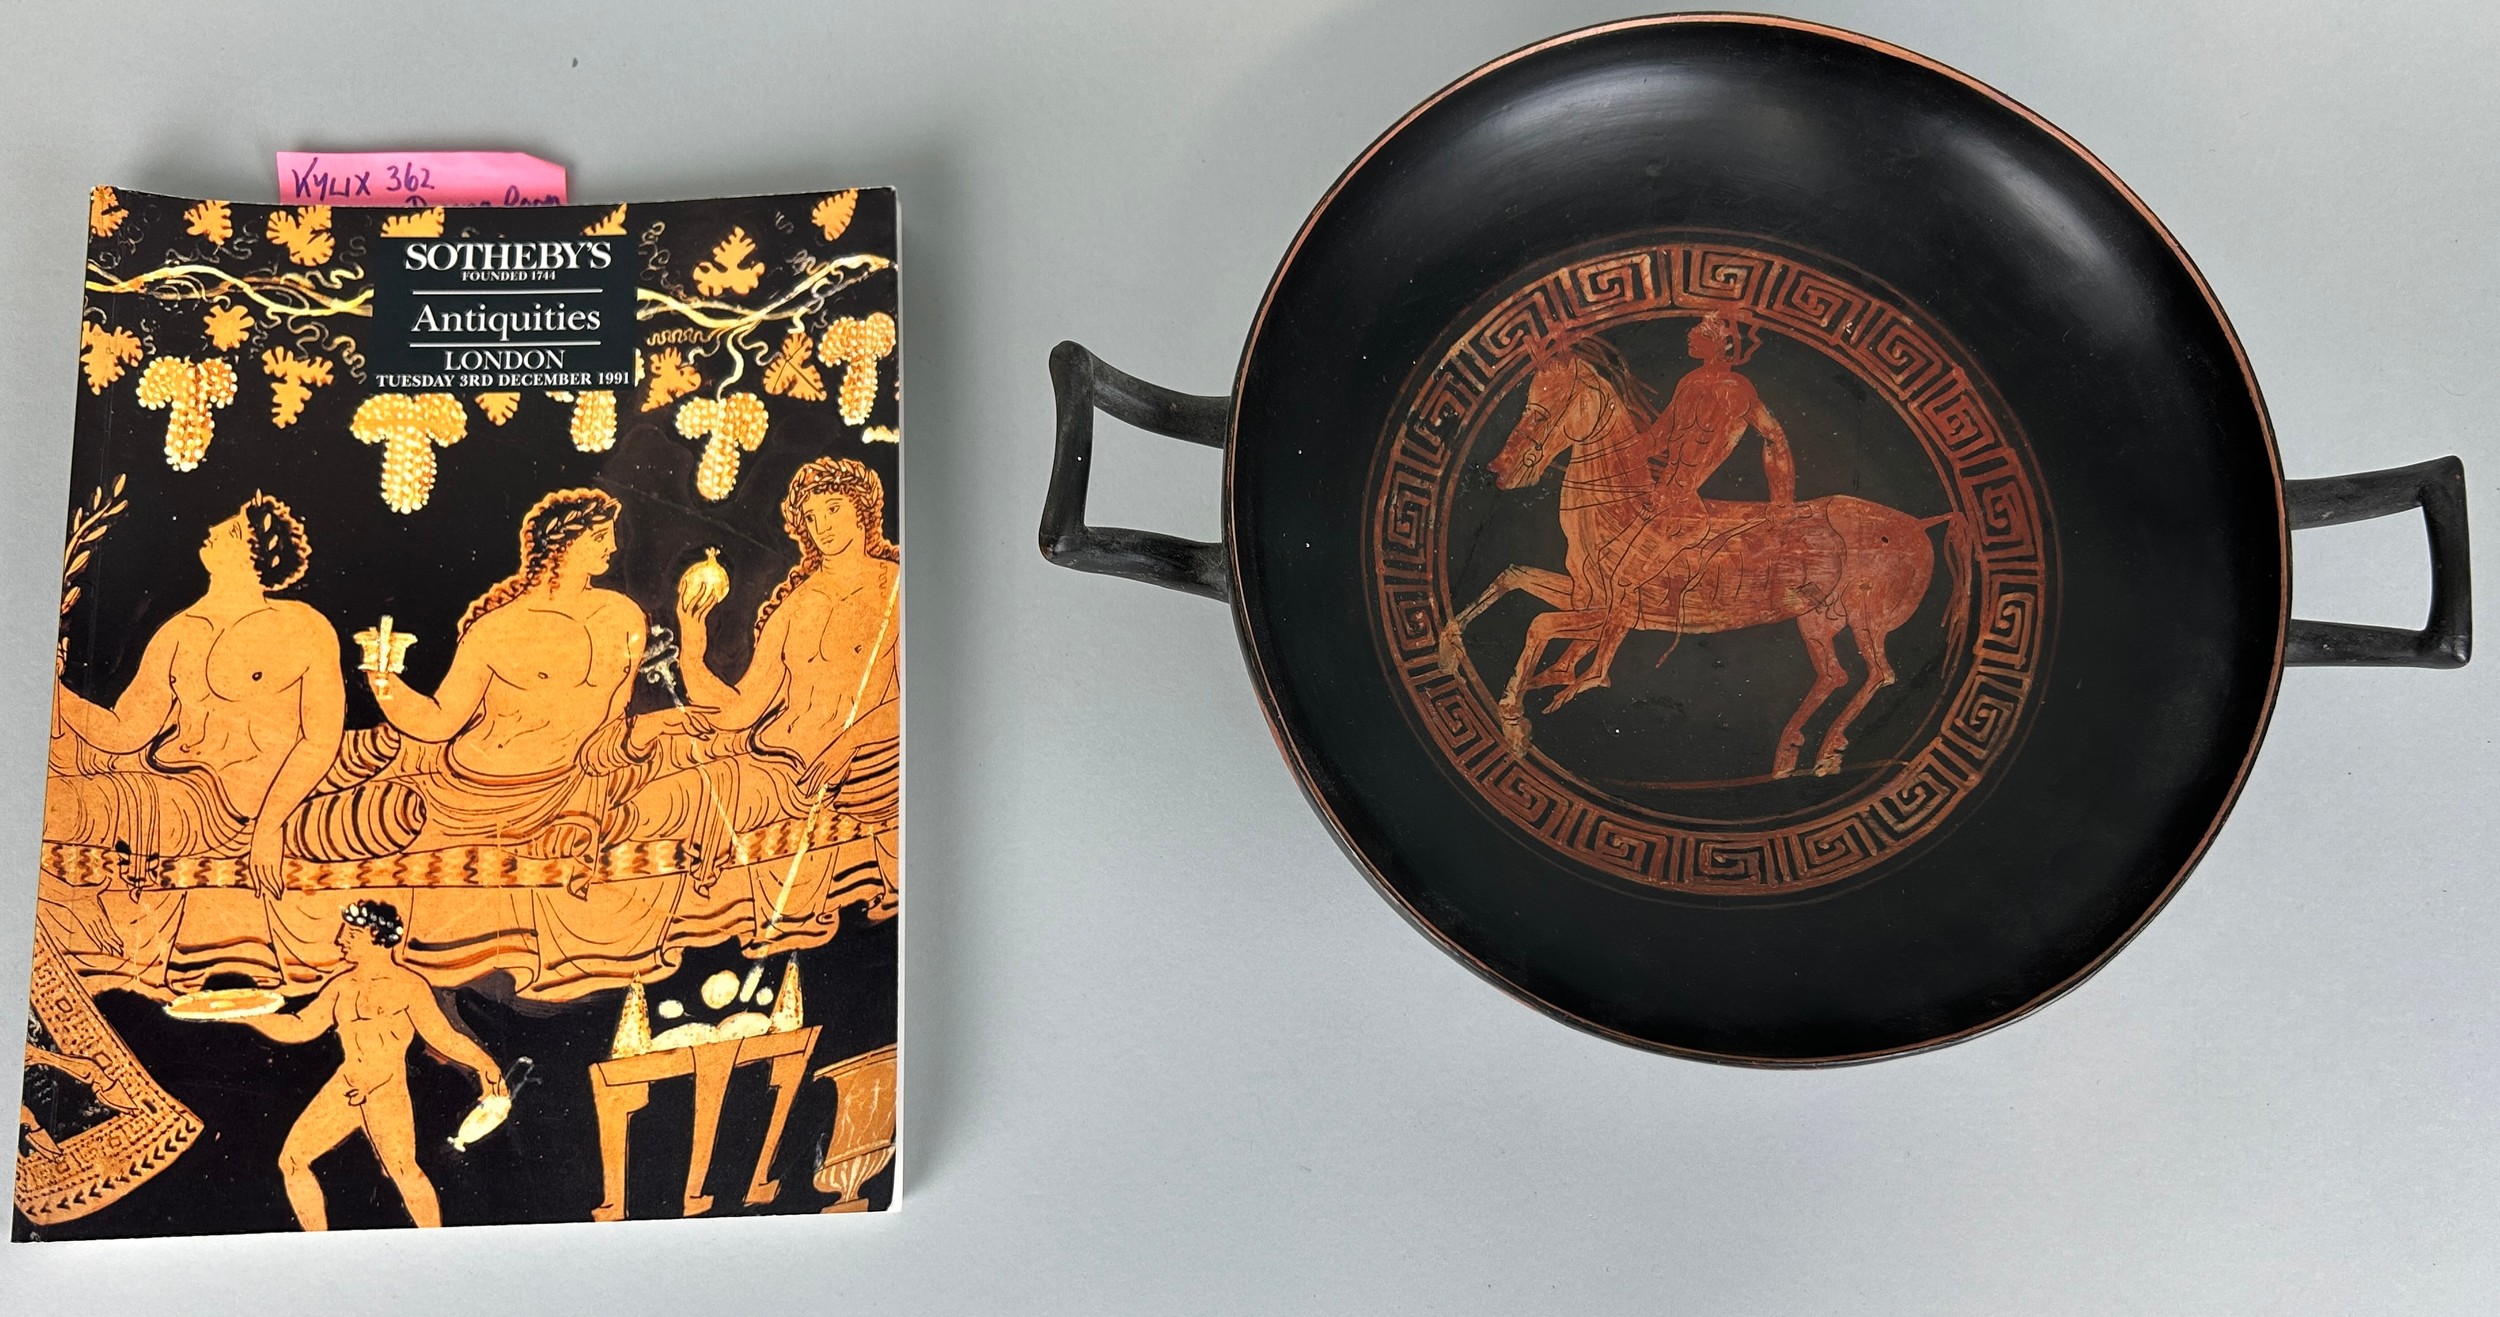 AN APULIAN POTTERY KYLIX DECORATED WITH A HORSE AND RIDER CIRCA 5TH CENTURY B.C. - Image 9 of 10